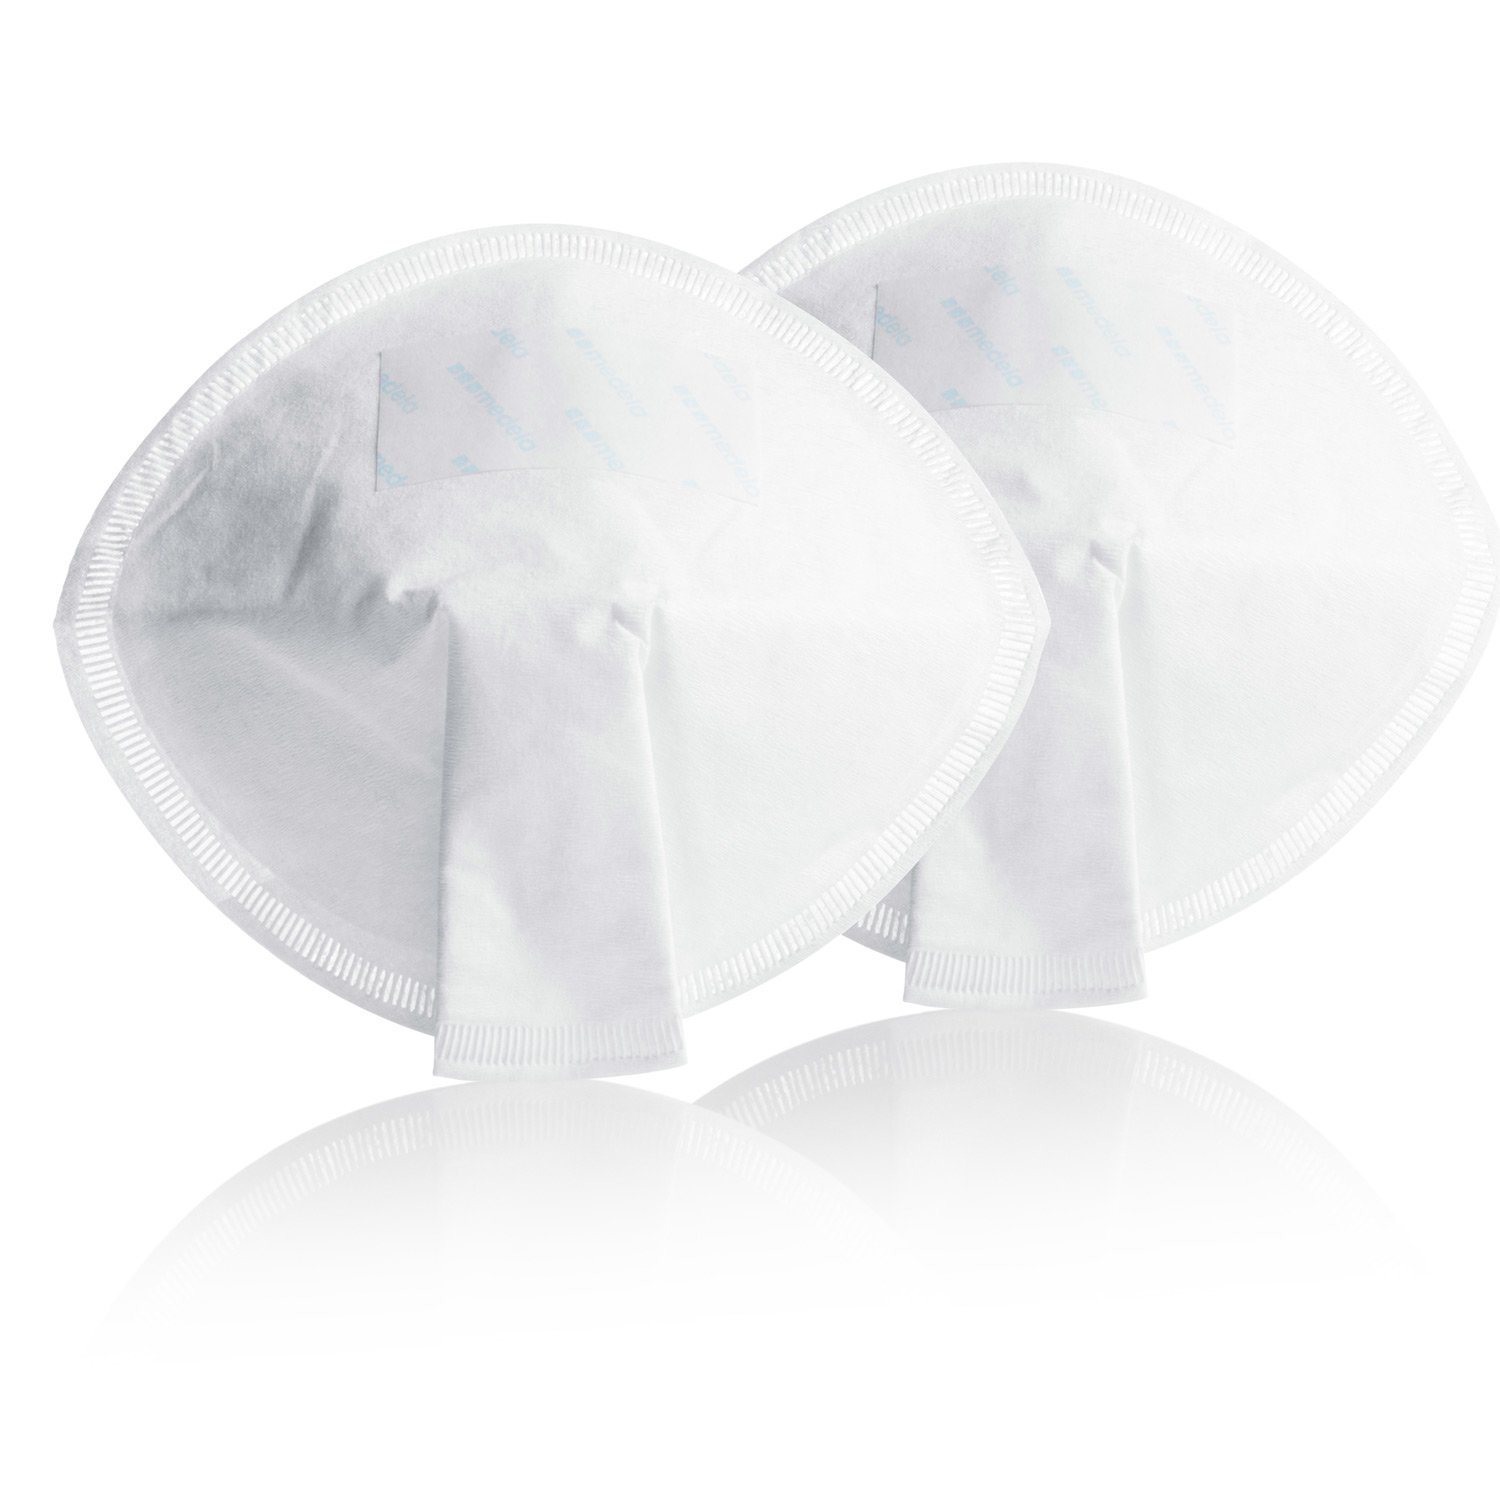 Medela 008.0248 Disposable Breast Pads, Pack of 30